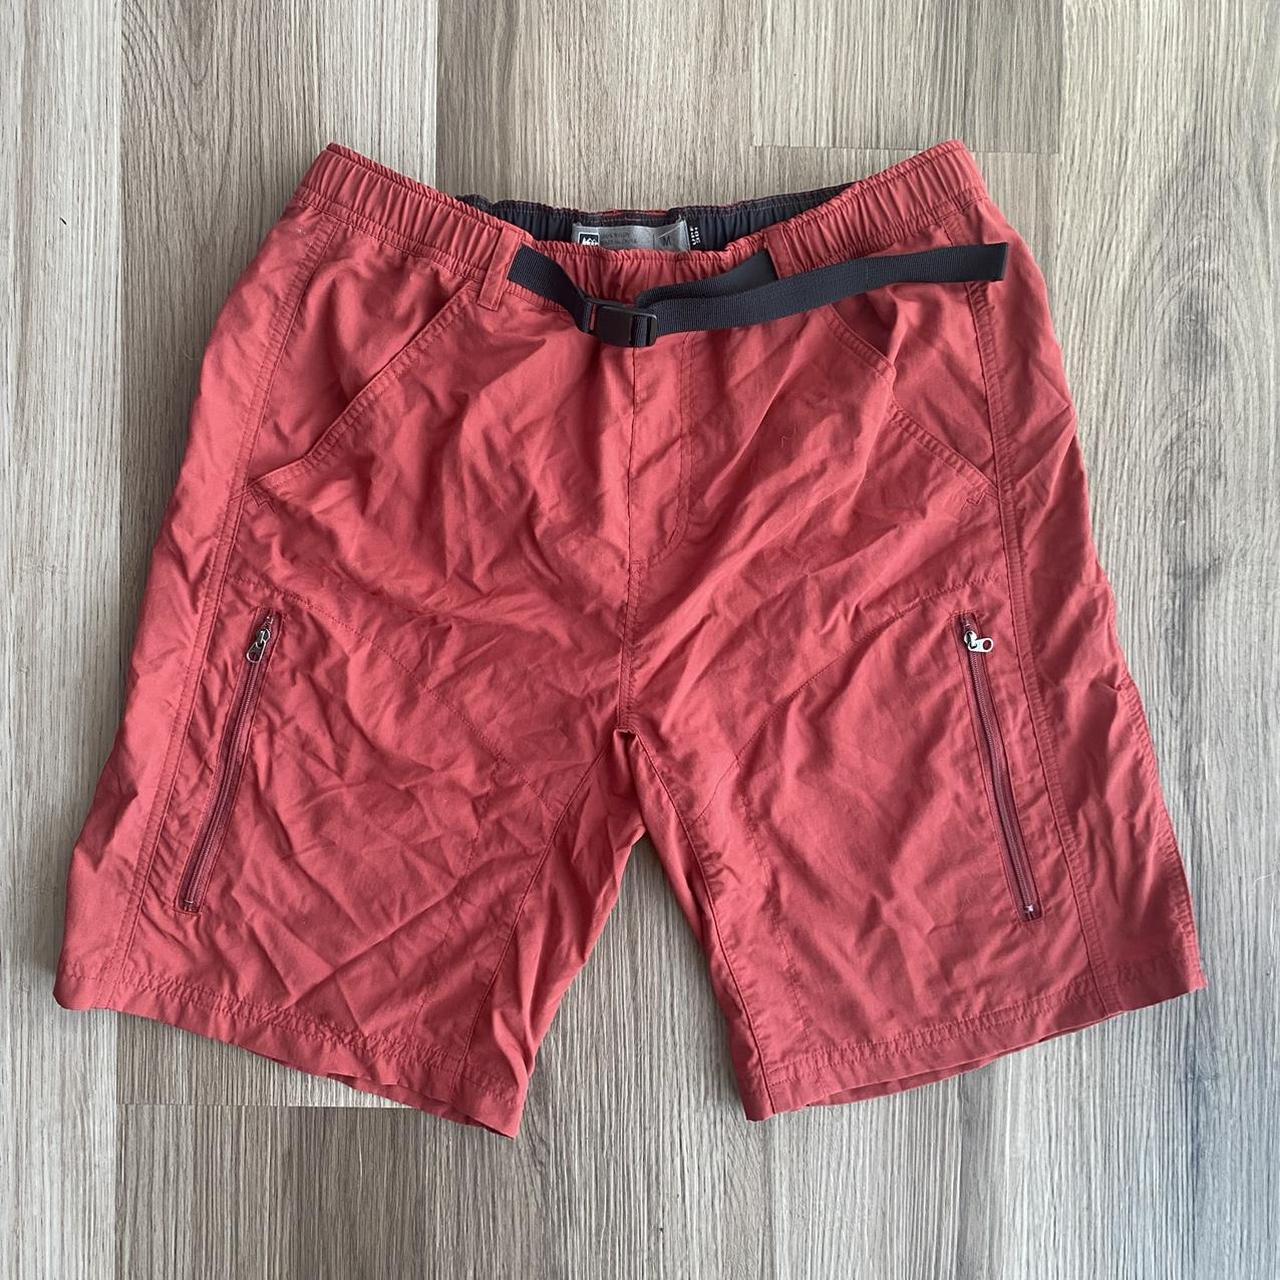 REI Co-op Men's Red and Black Shorts | Depop